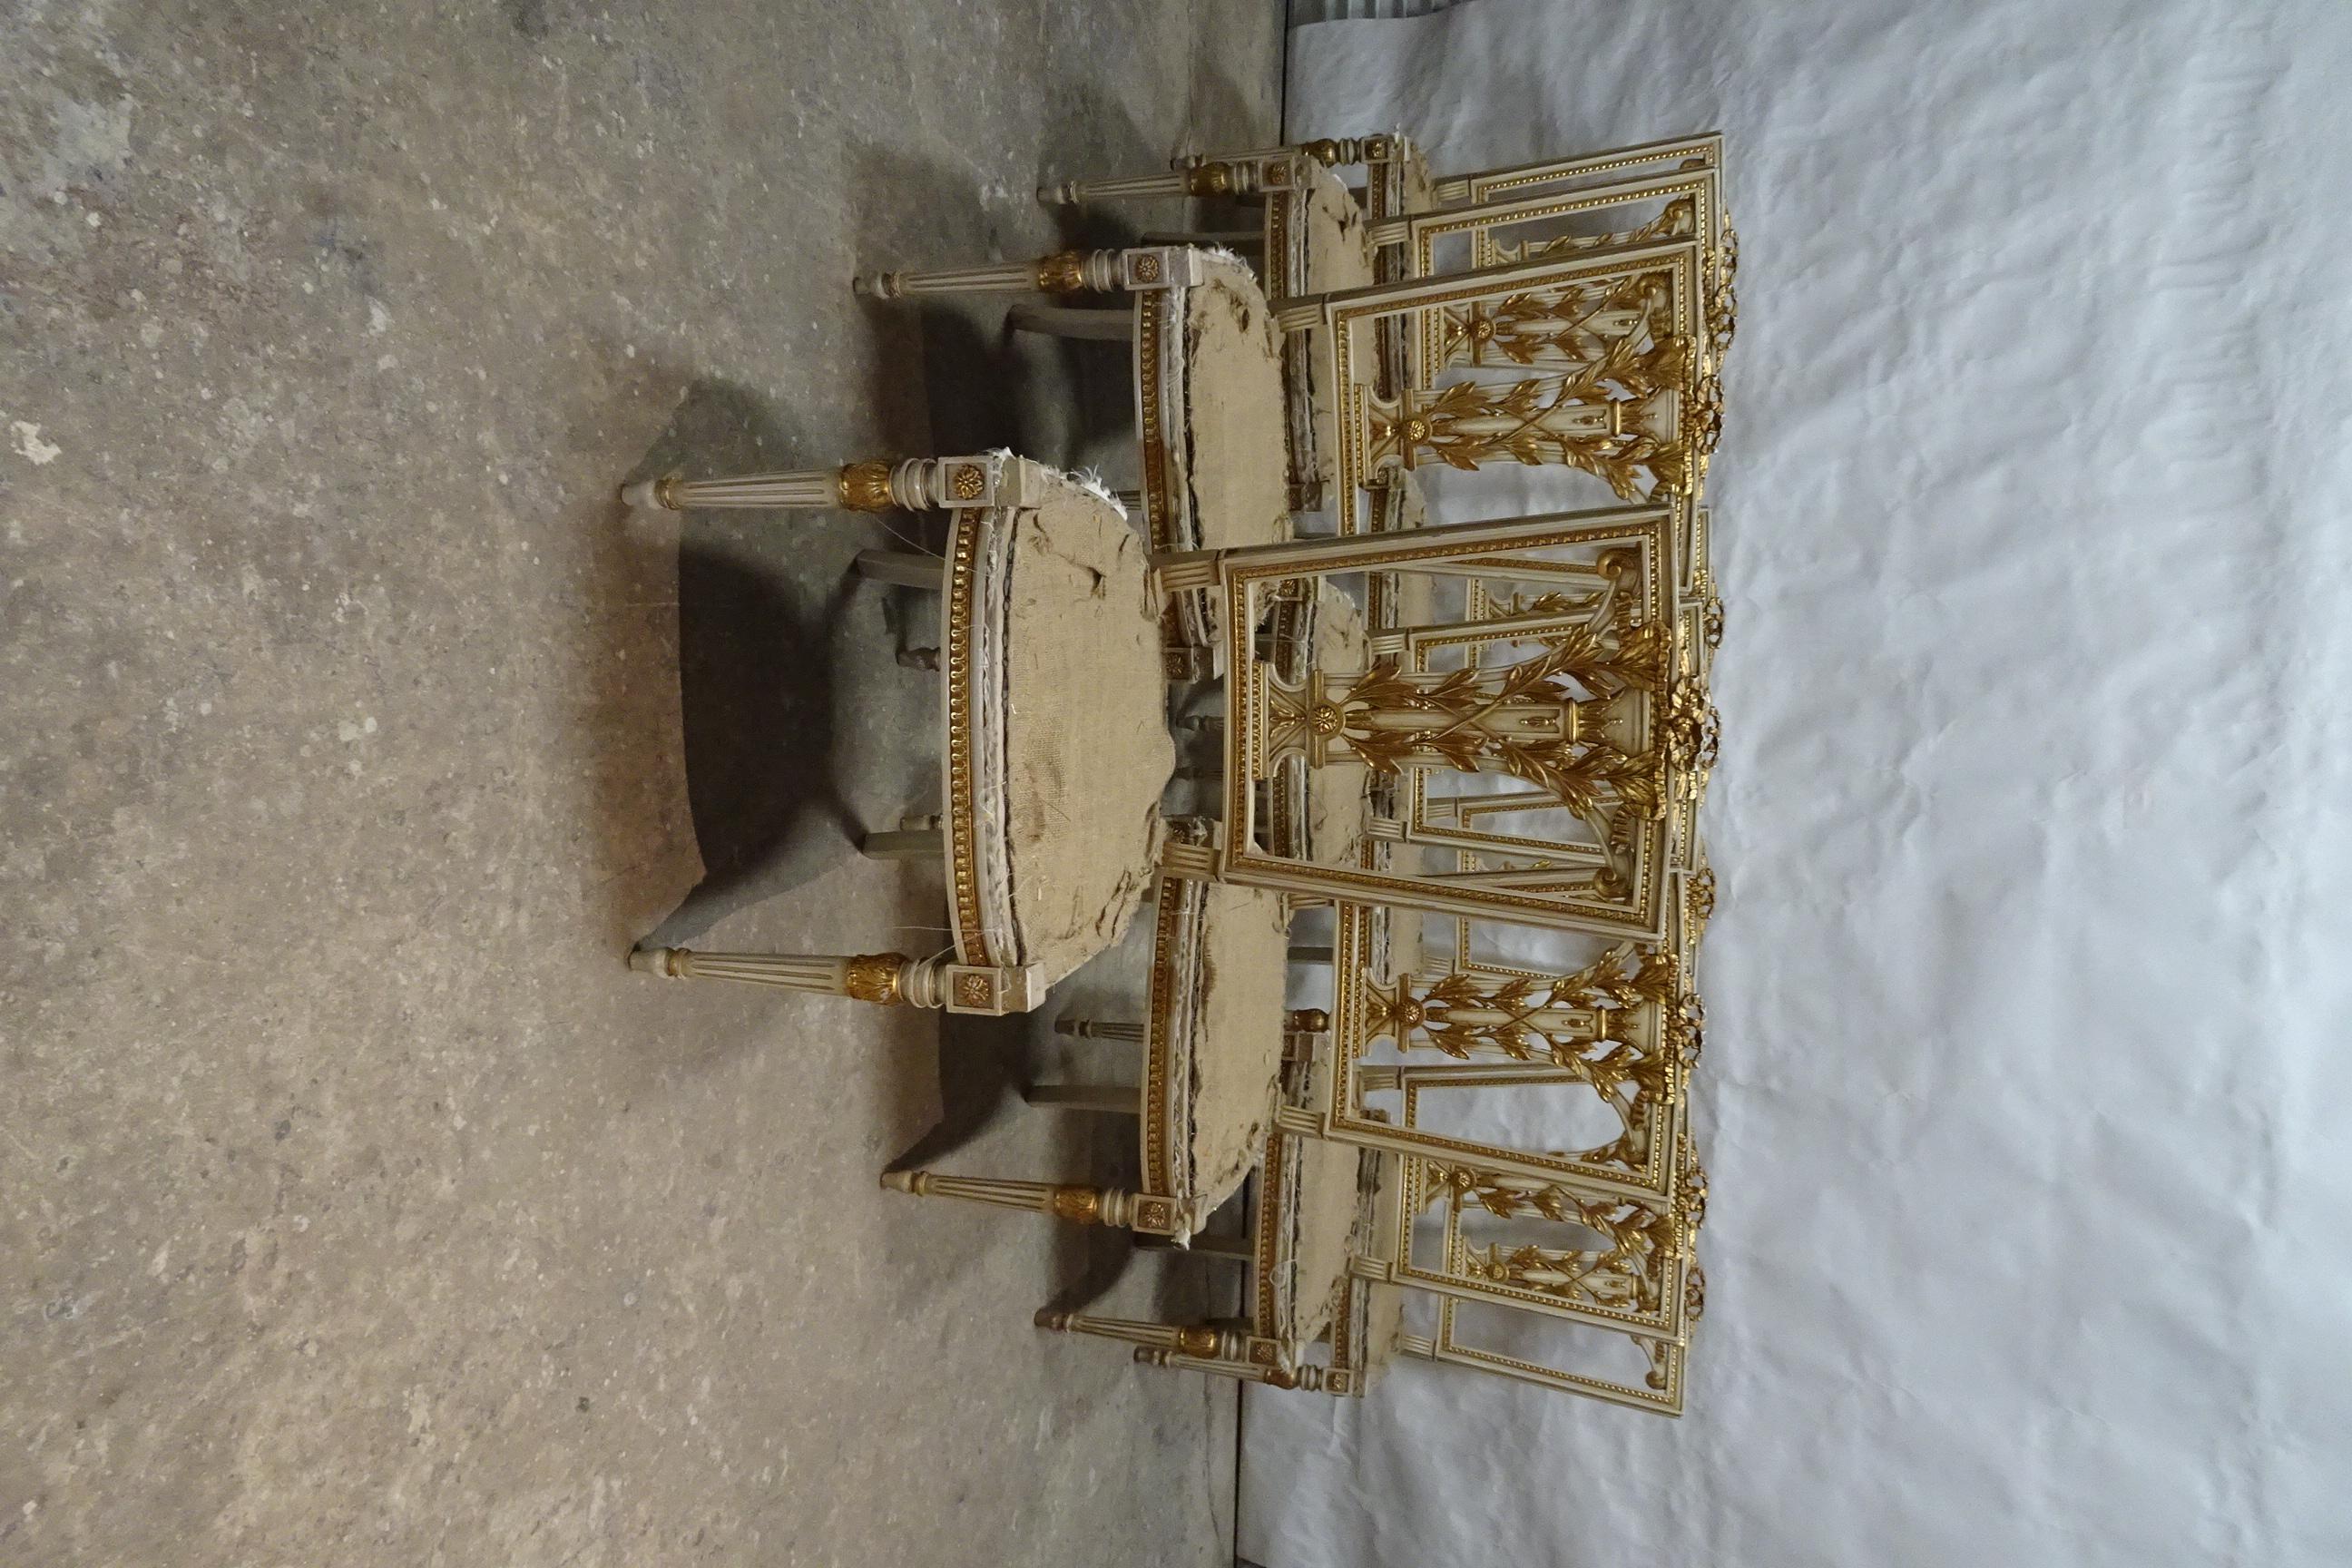 This is a VERY unique set of 10 {Slot Stolar} Castle Chairs. these are Solid Wood chairs NO Resin or Plastic!!! they are 100% Original finish. Structurally perfect but the finish has its normal ware. These are a once in a life time find and will